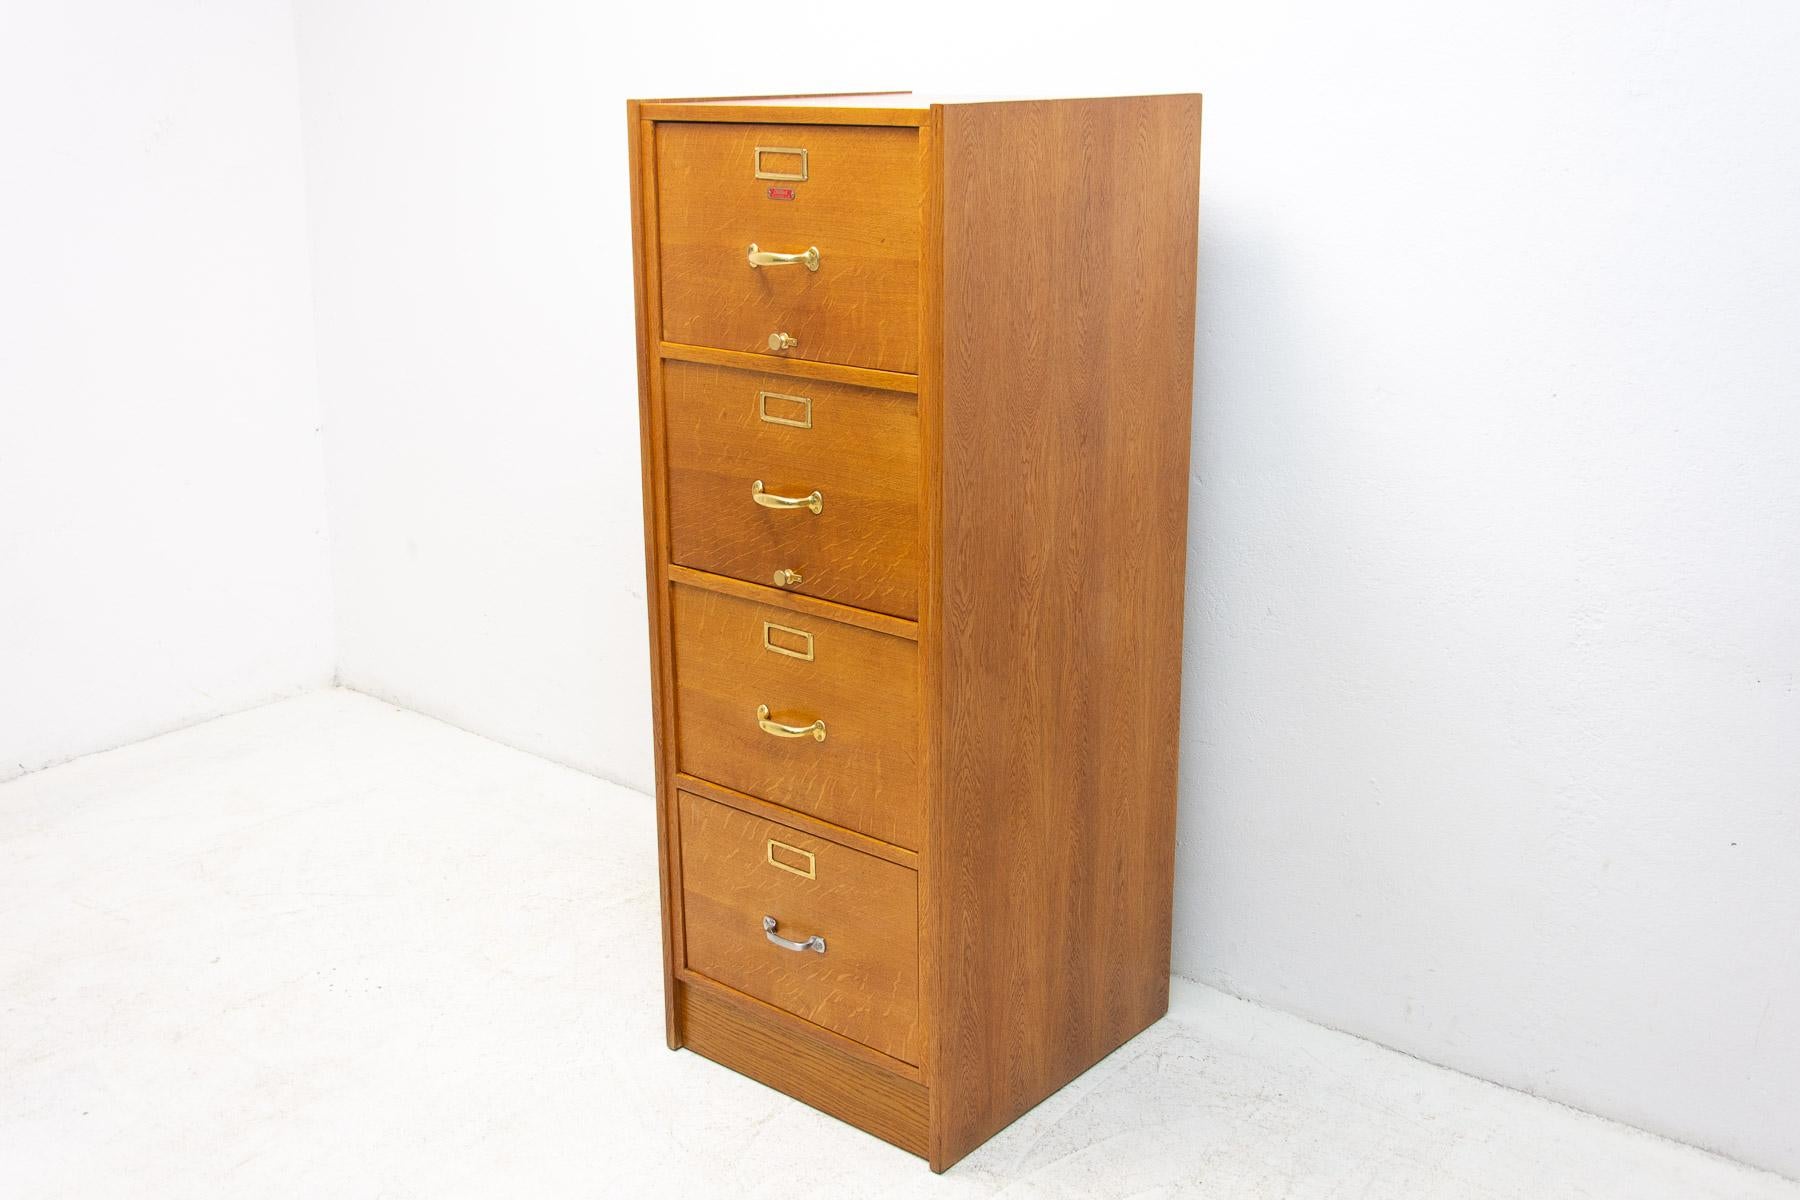  Functionalist Industrial Filing Cabinet, 1930s, Czechoslovakia In Excellent Condition In Prague 8, CZ